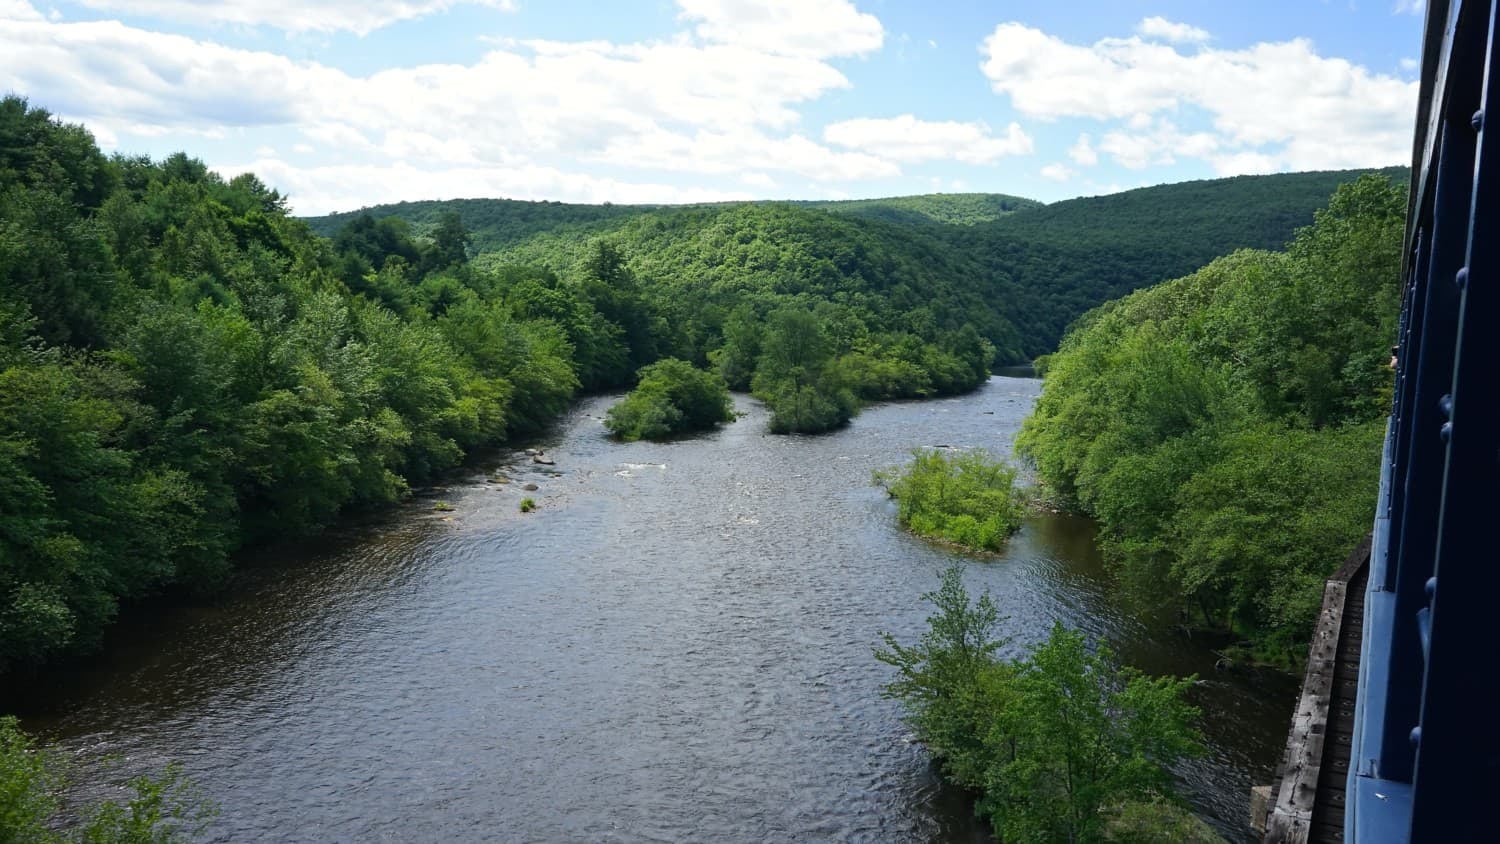 The Lehigh River from the scenic railway